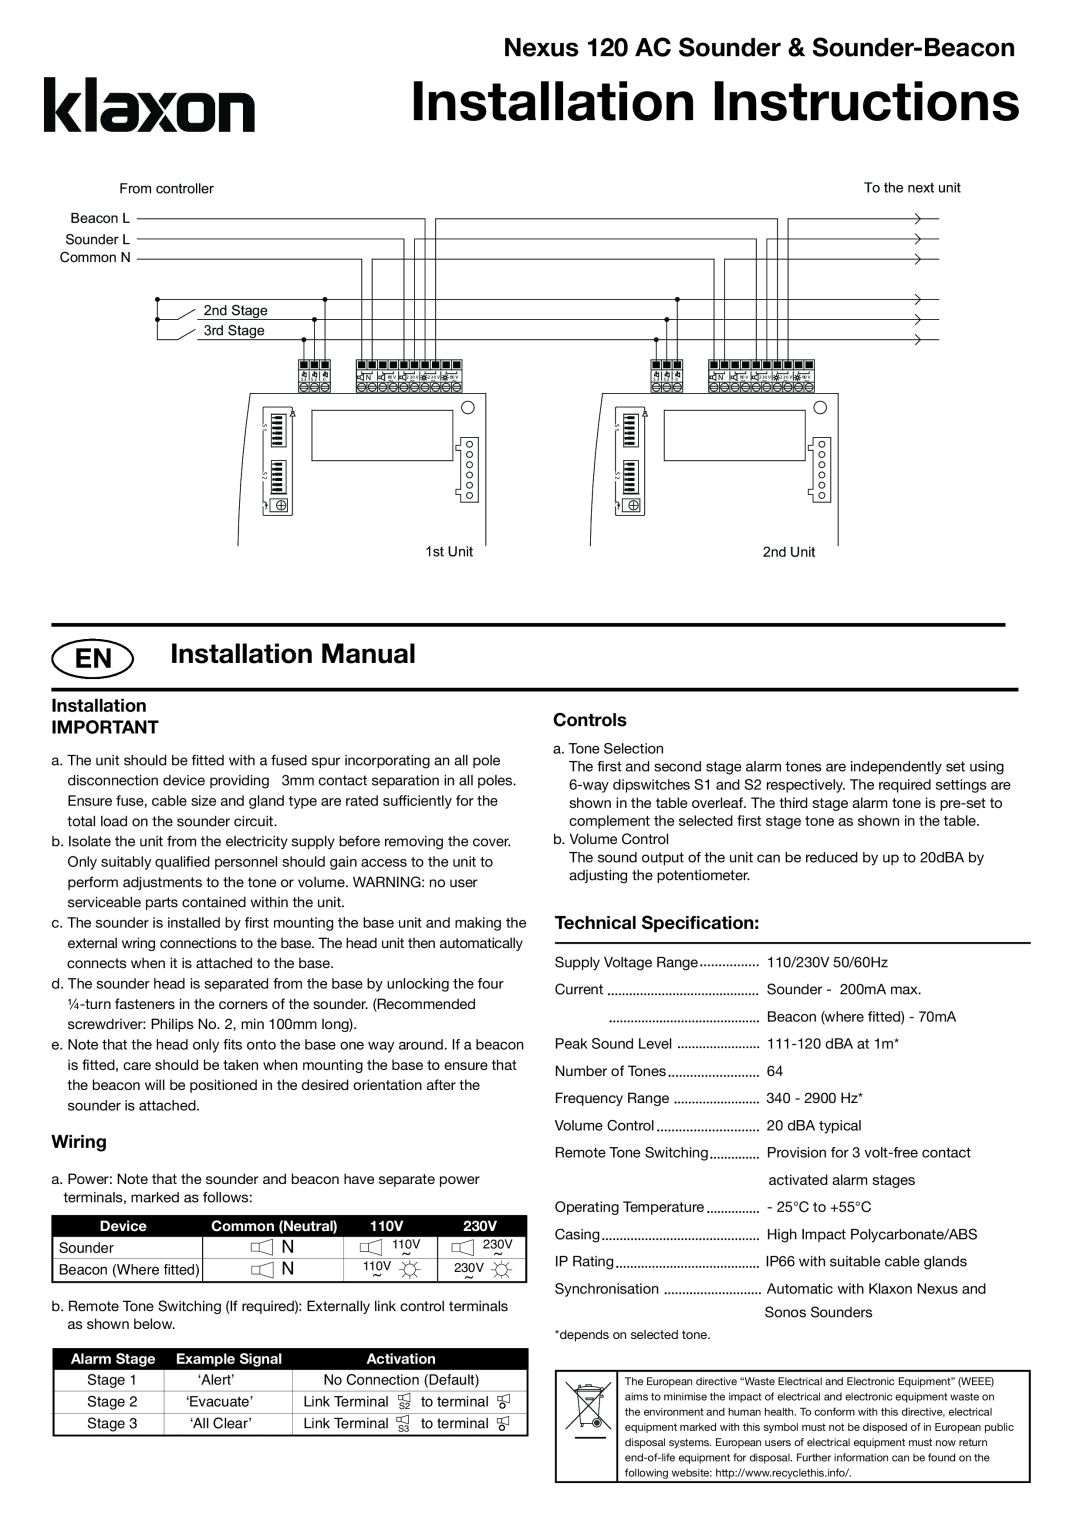 Klaxon 120 AC Installation Manual, Controls, Technical Specification, Wiring, Installation Instructions 